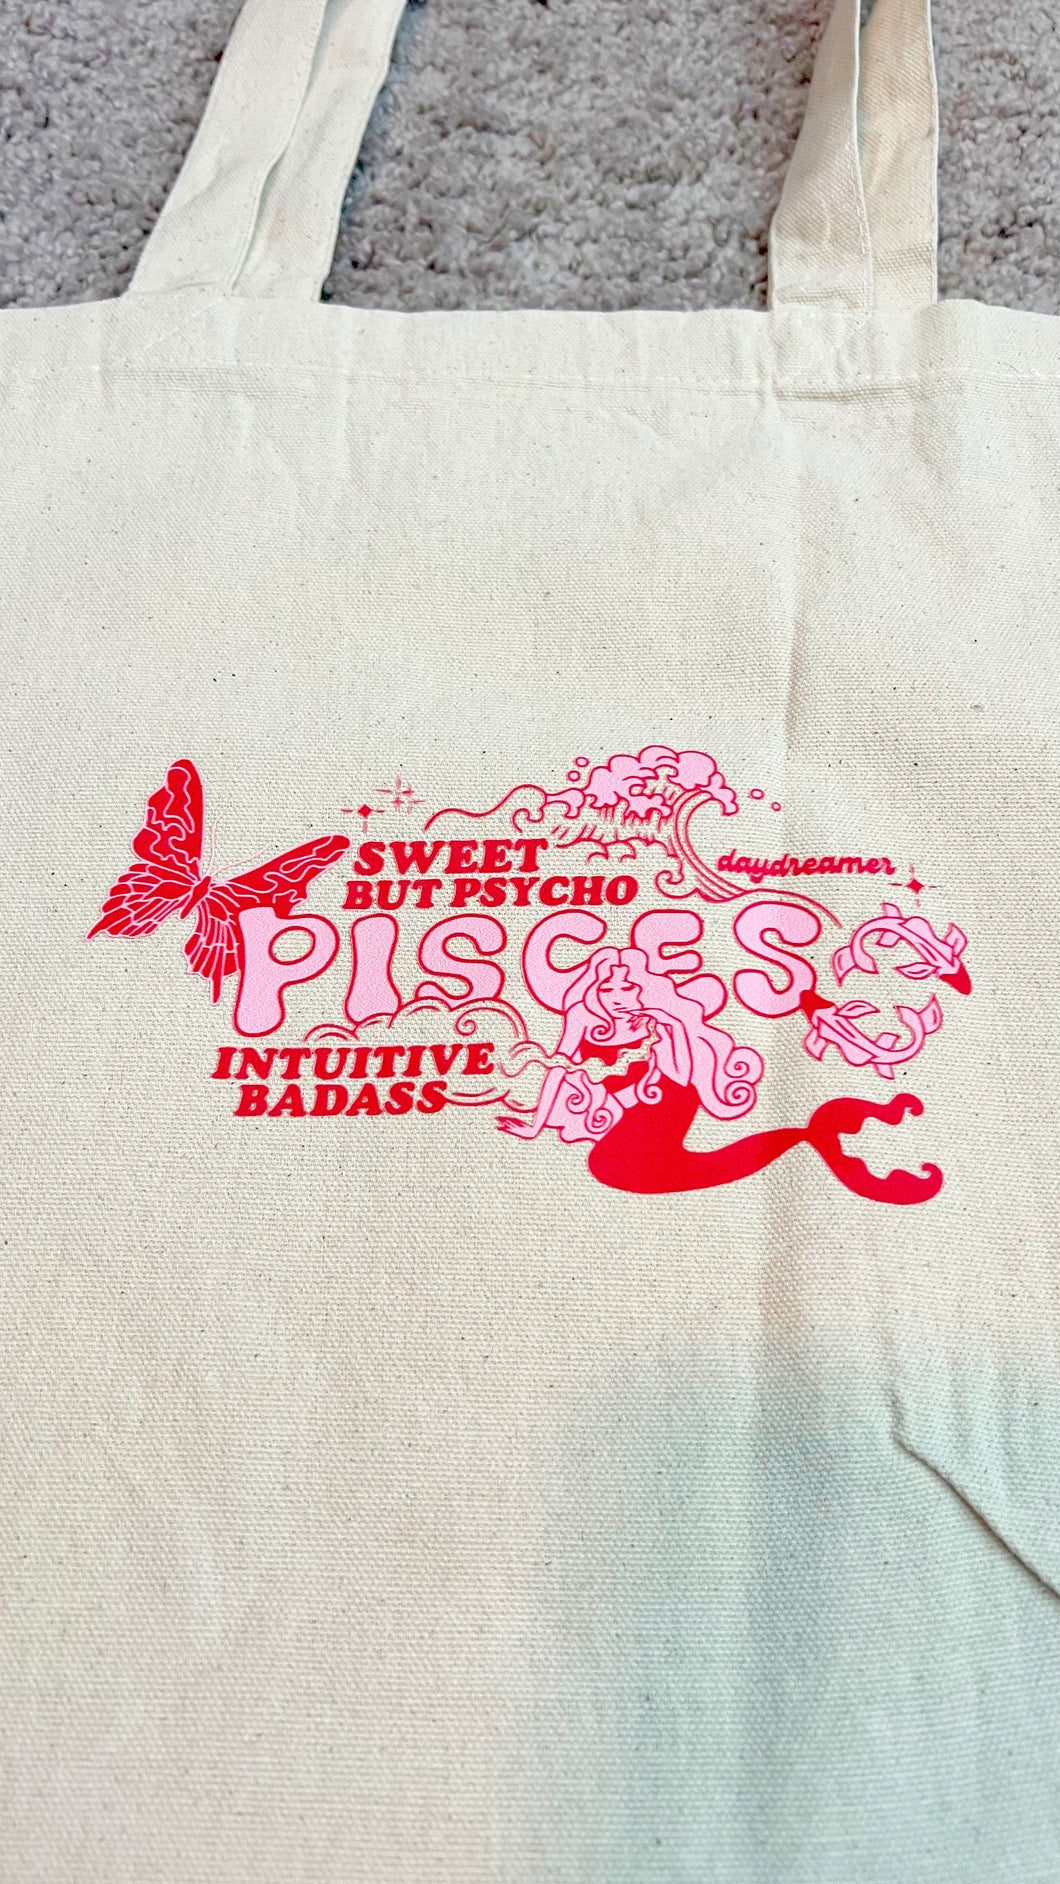 PISCES TOTE BAG